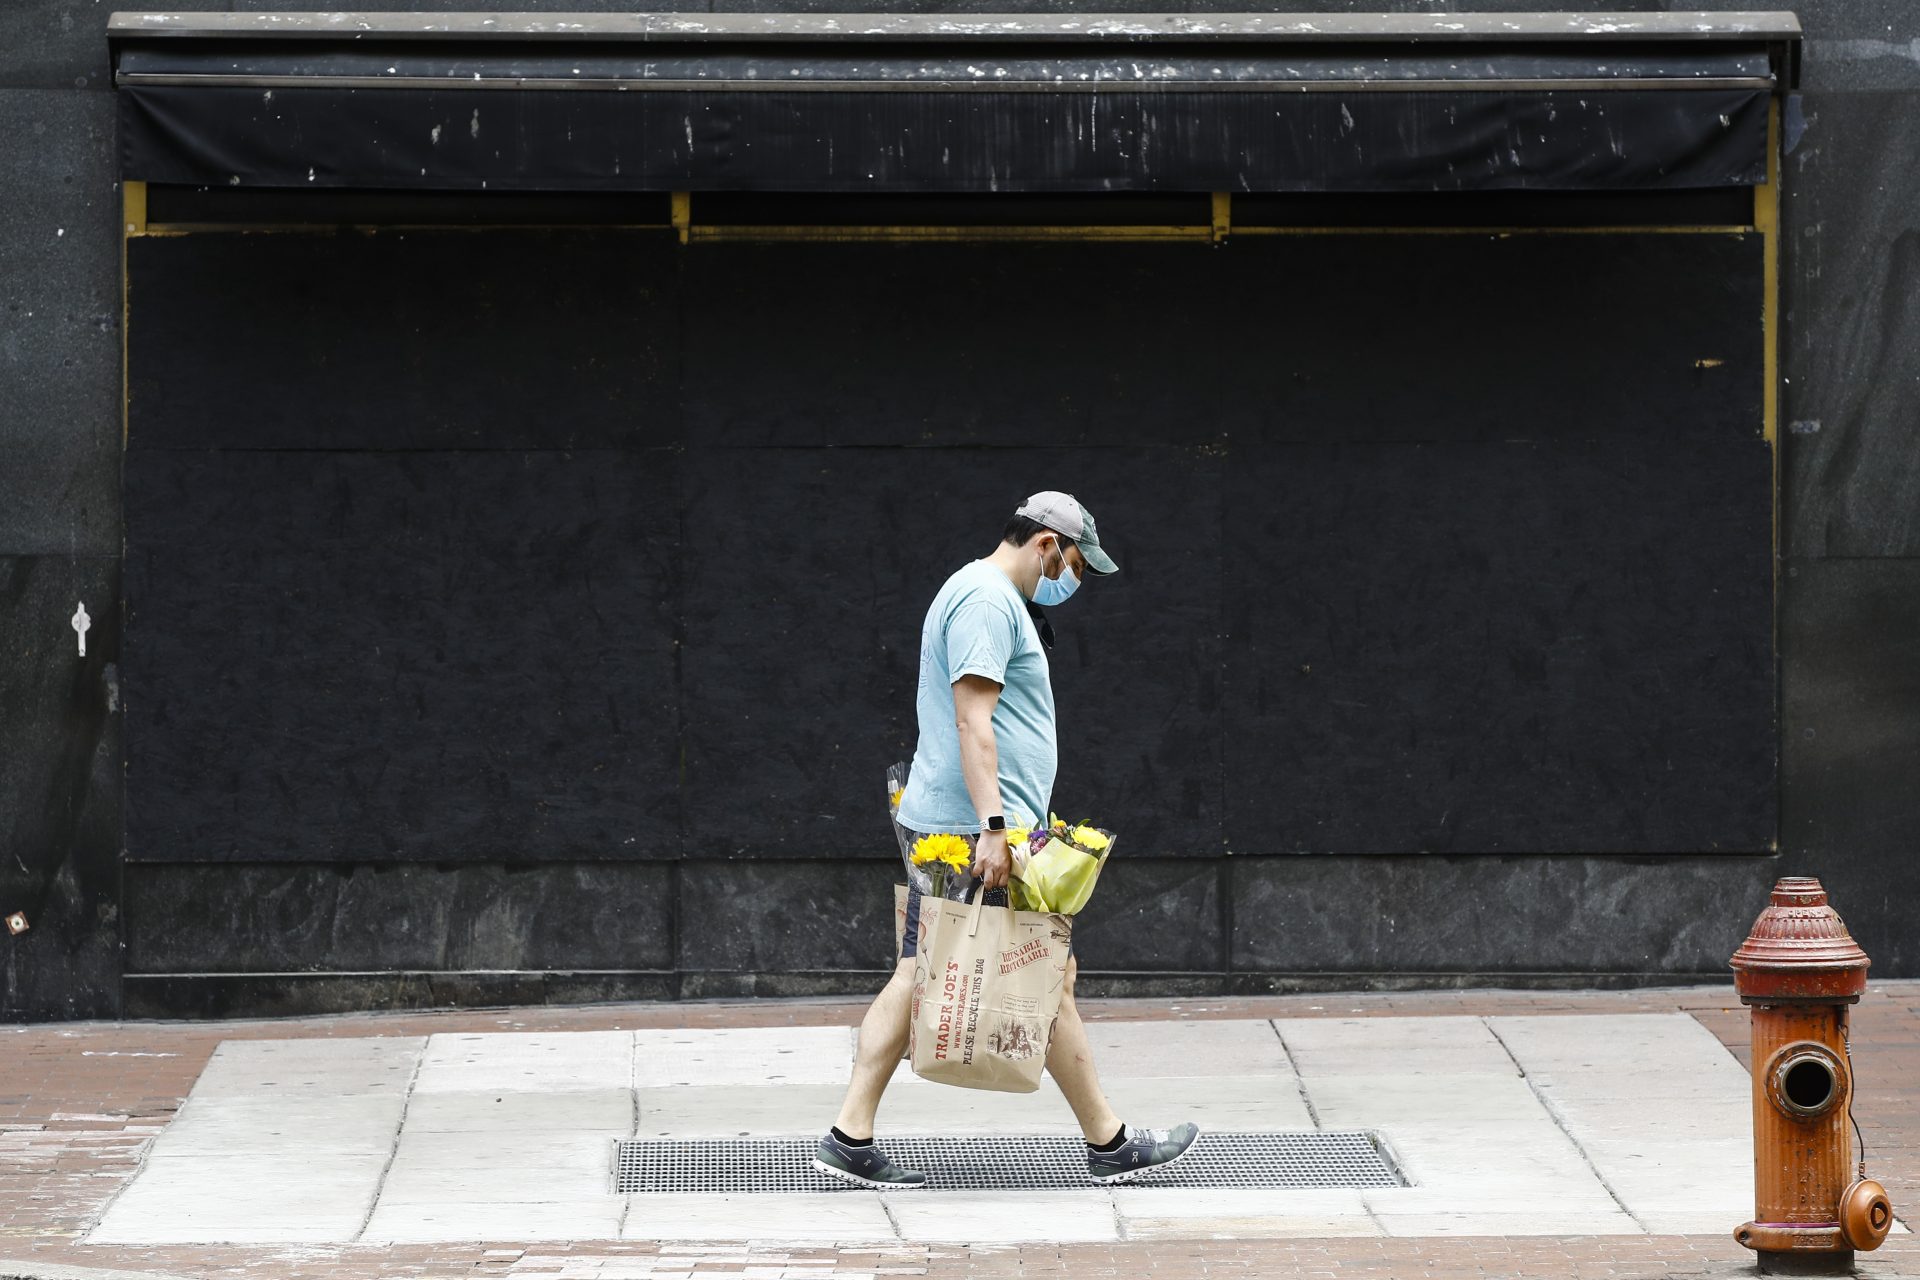 A person wearing a protective face mask as a precaution against the coronavirus walk past a boarded up business in Philadelphia, Thursday, May 21, 2020.